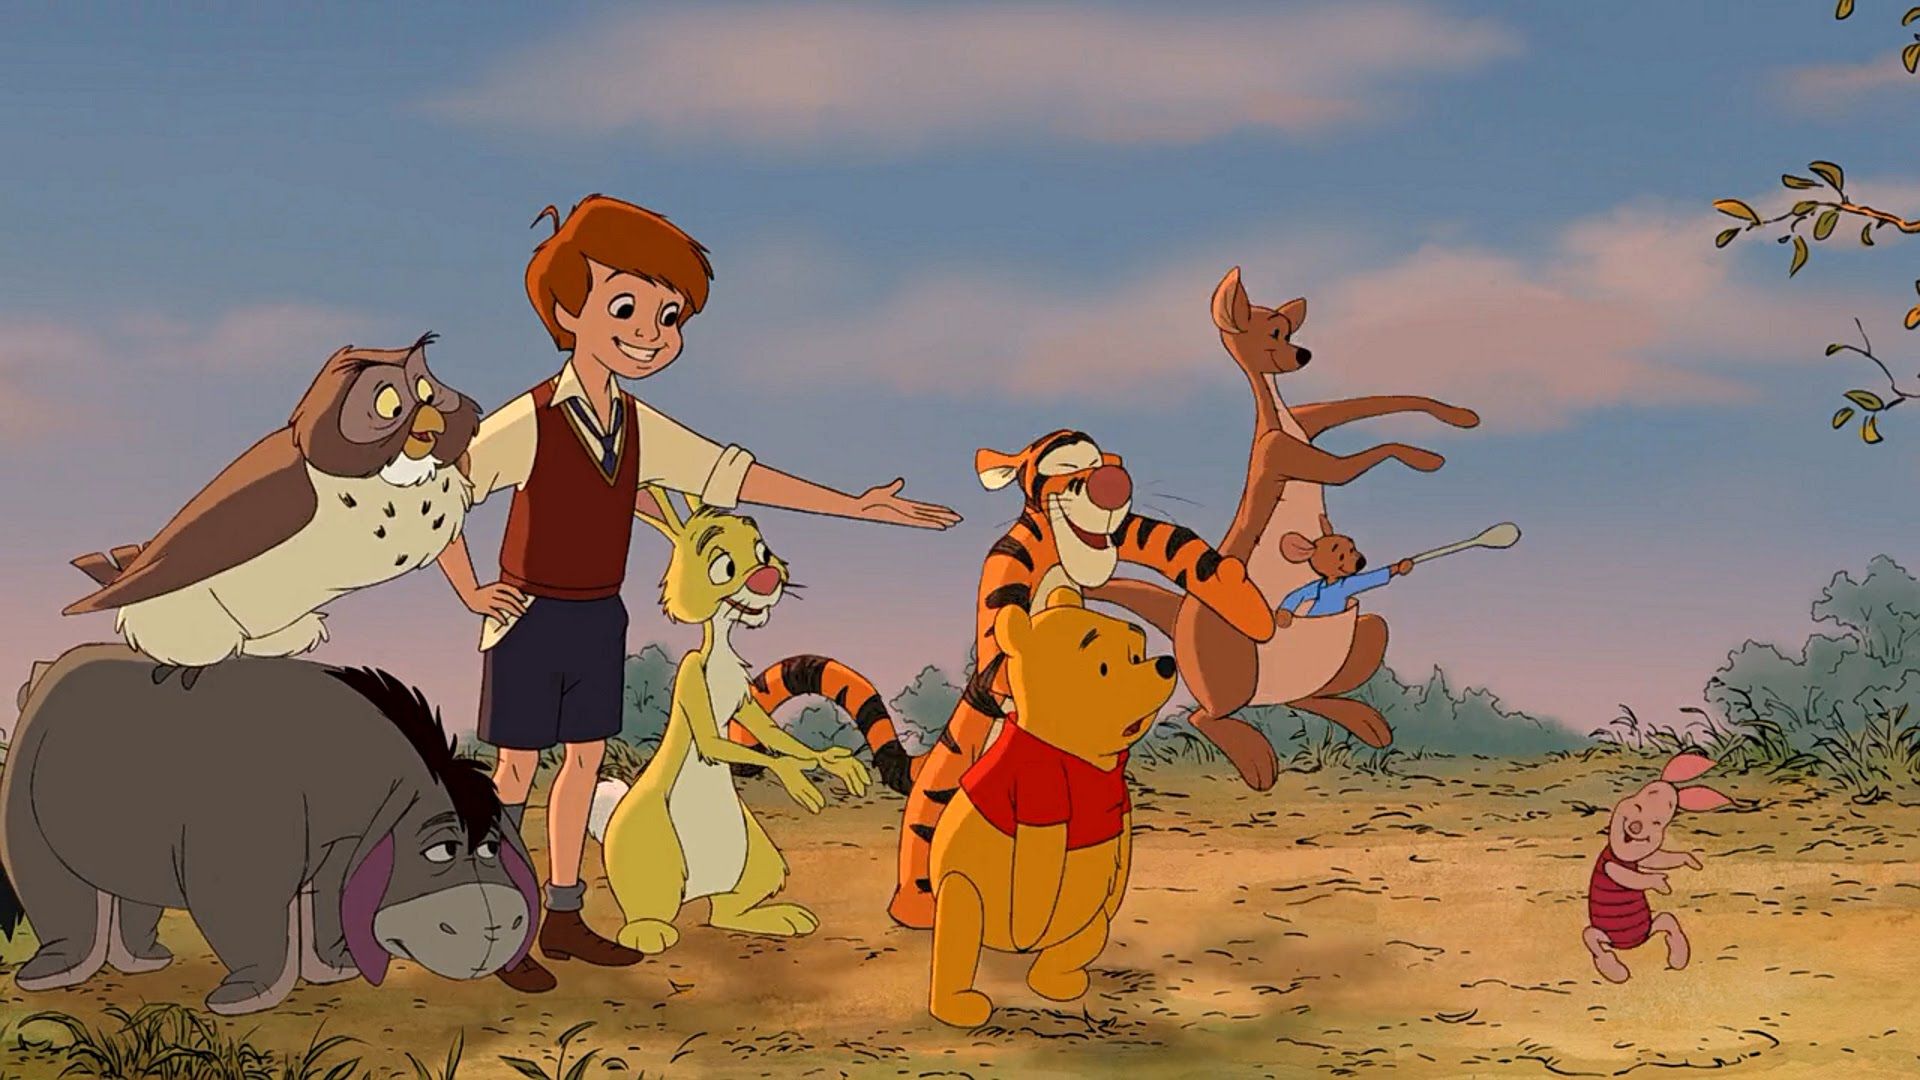 25 Surprising 'Winnie The Pooh' Facts: The Good, The Bad And The Weird